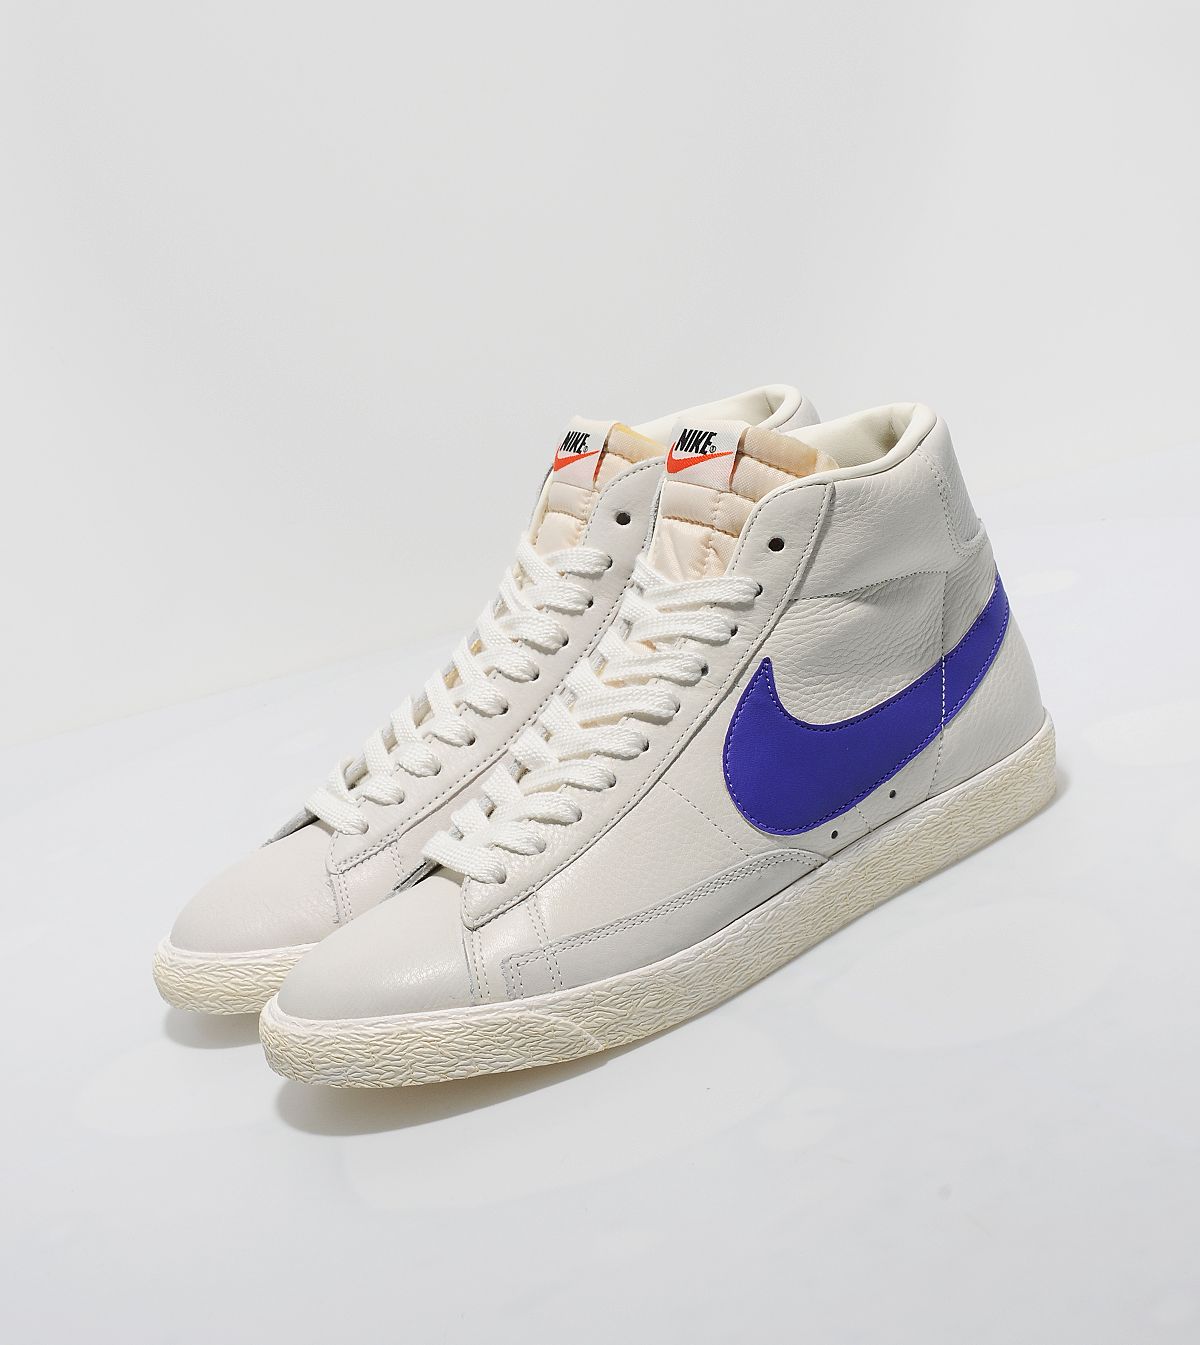 nike blazer croc-effect leather high-top sneakers